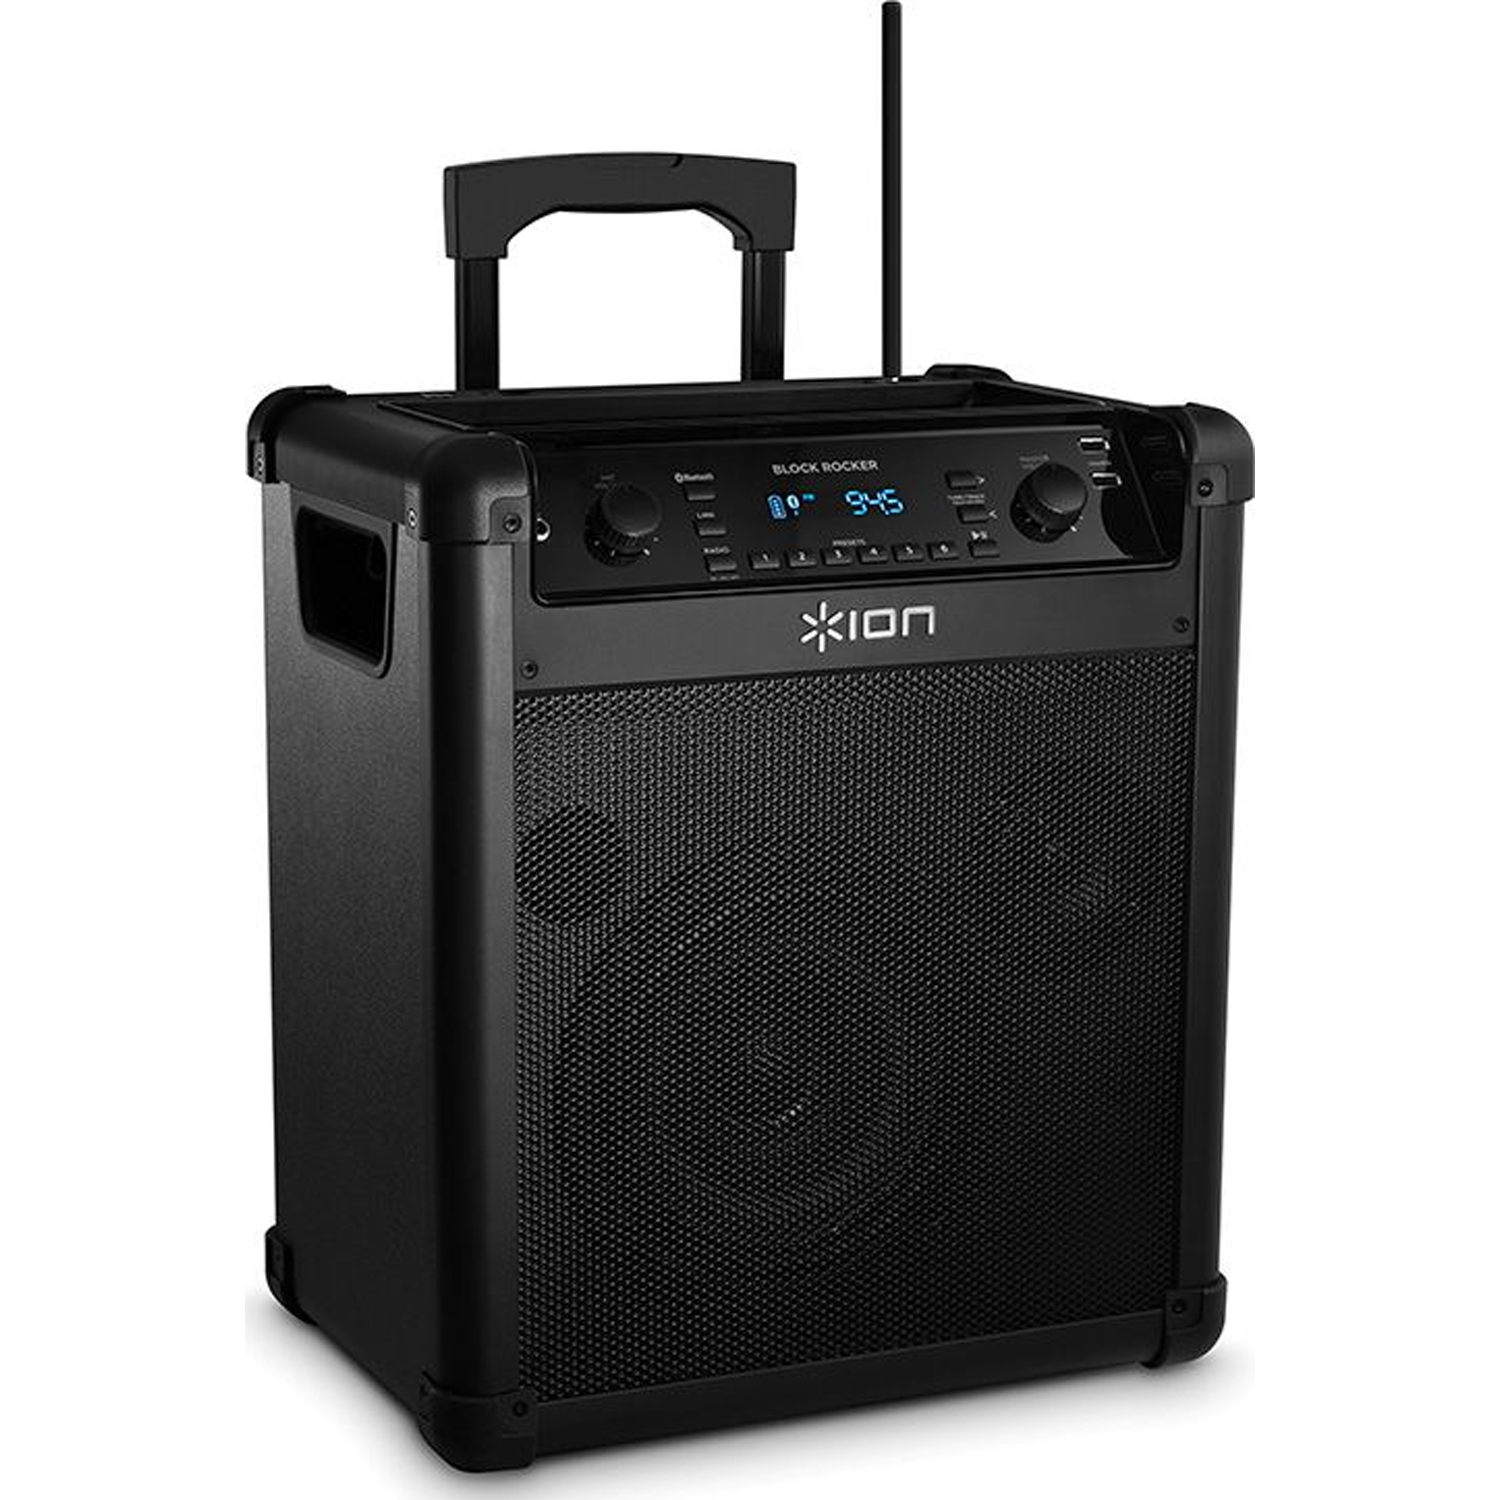 ION AUDIO Block Rocker Bluetooth Portable Speaker System with Wireless Technology USED